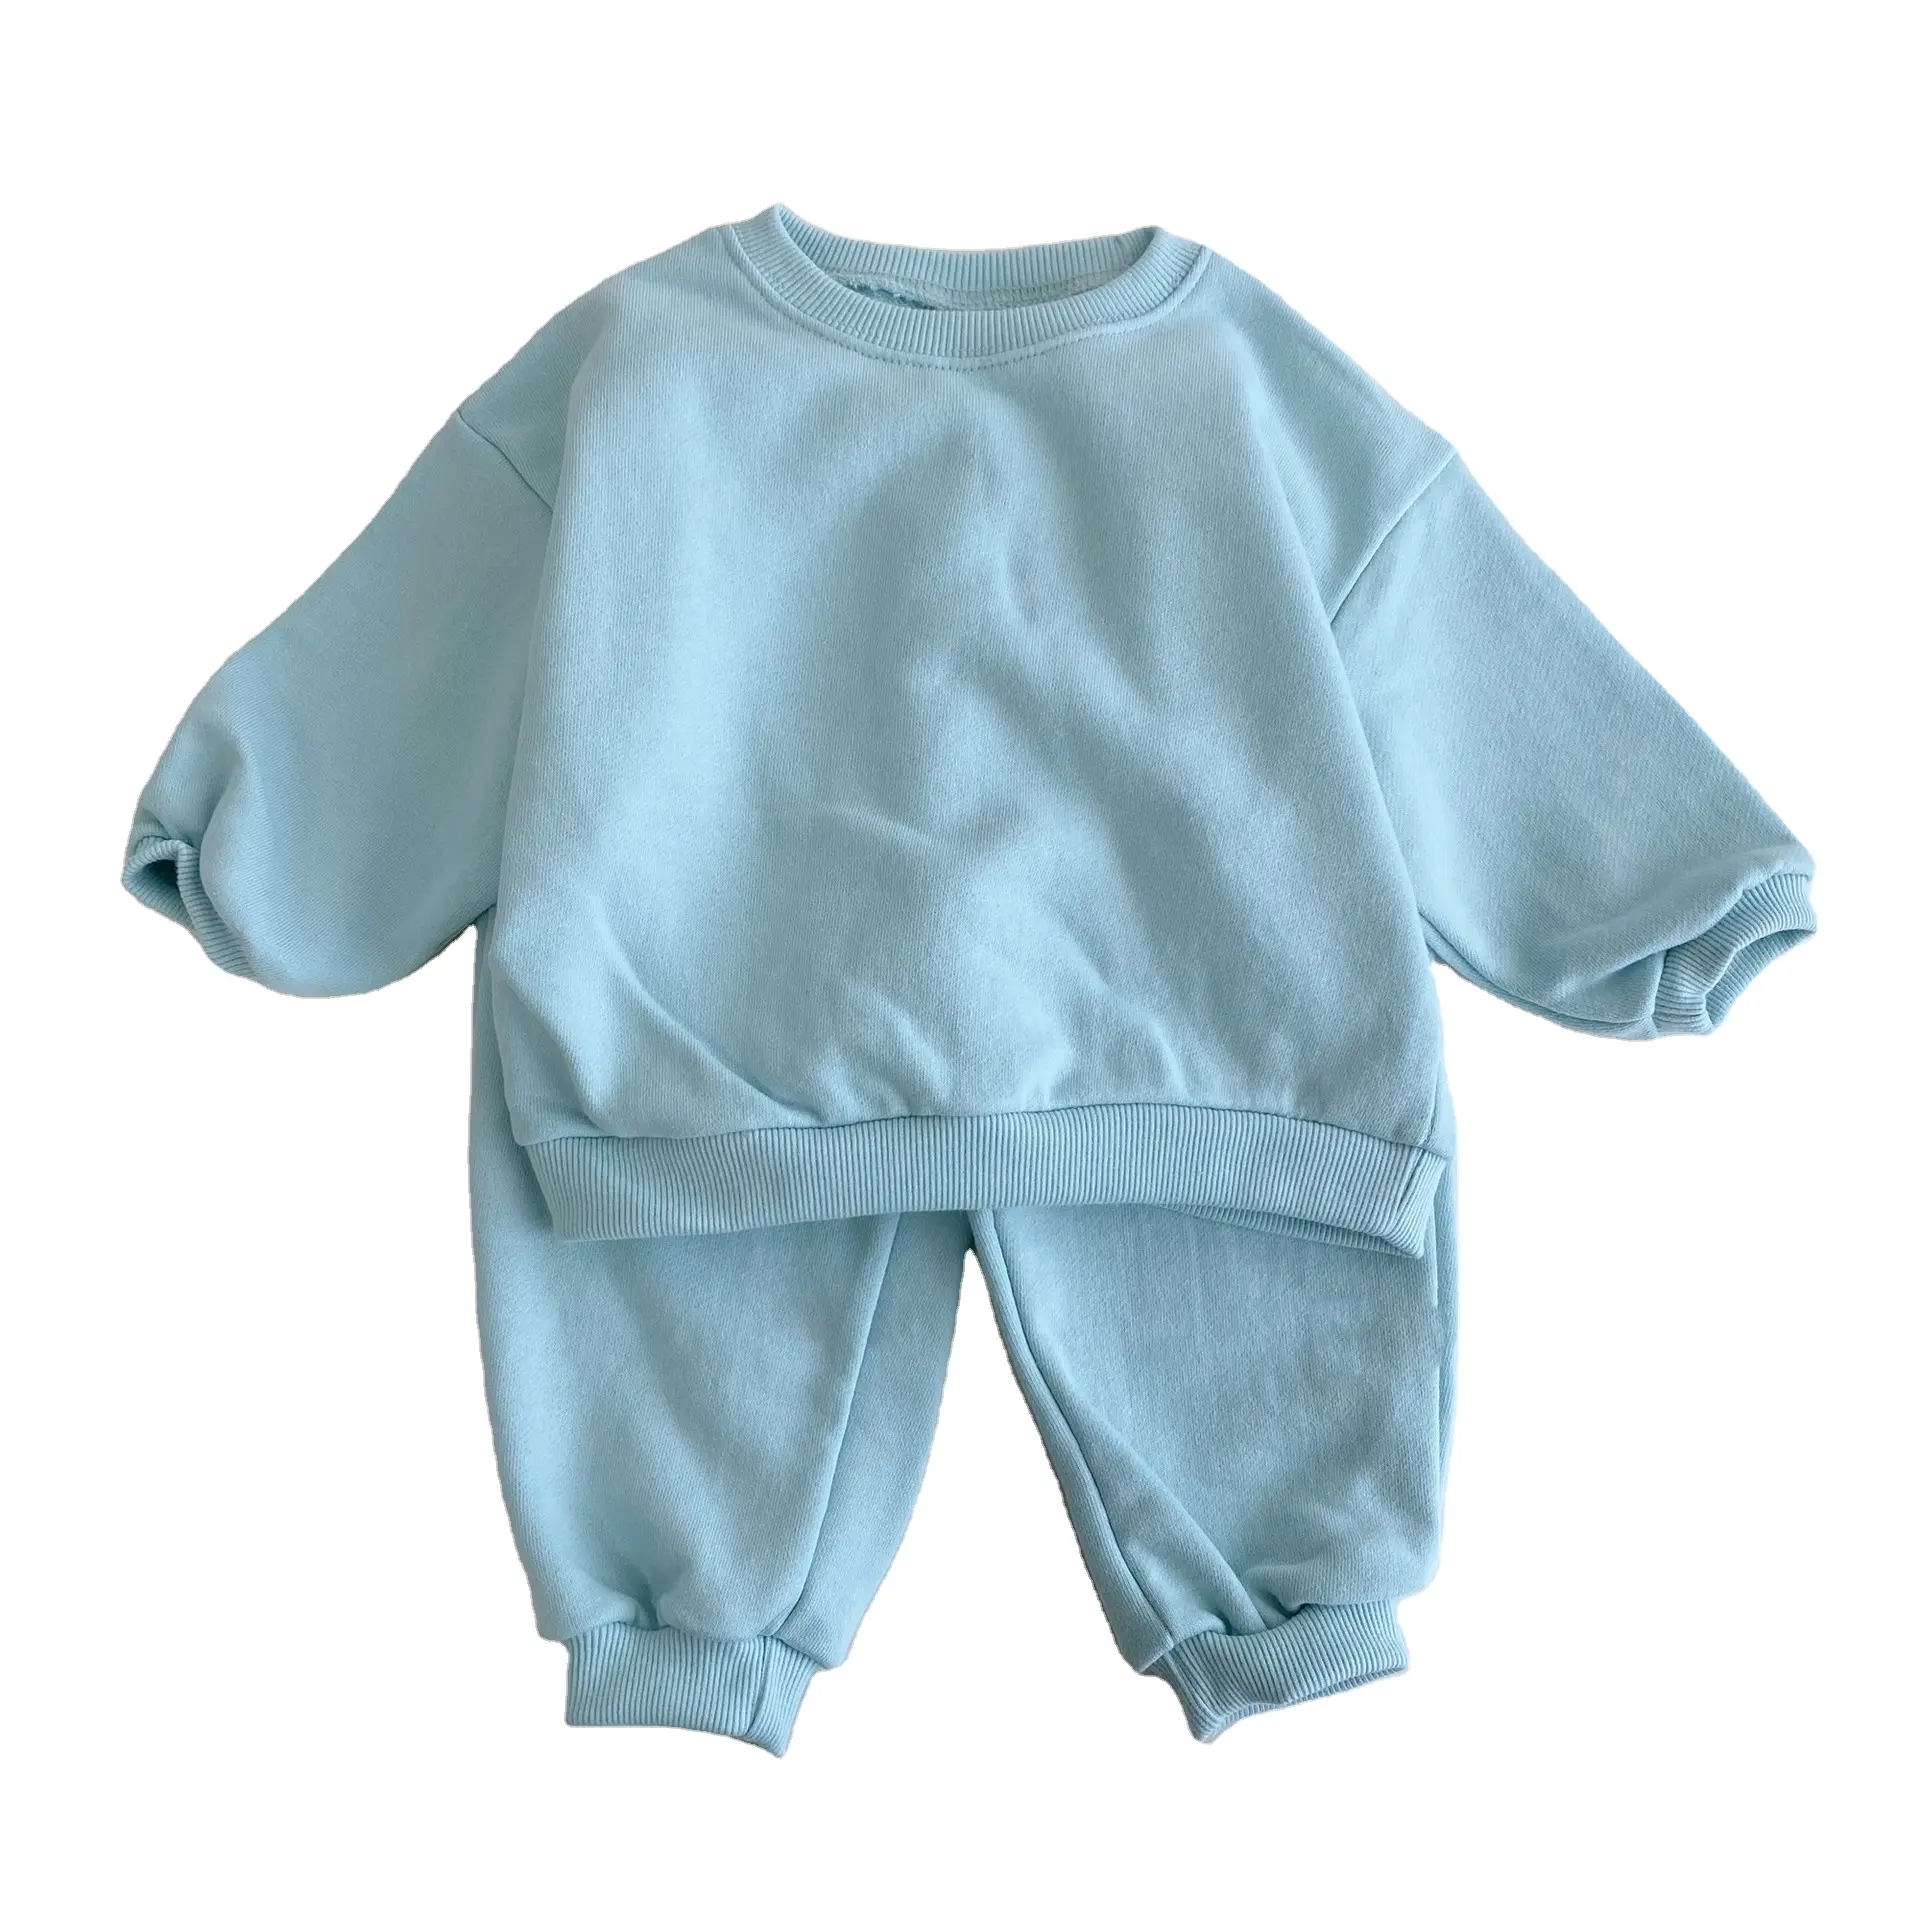 Hot Sale 100% Cotton Solid Children Autumn Casual Baby Boy Clothing Sets kids tracksuits